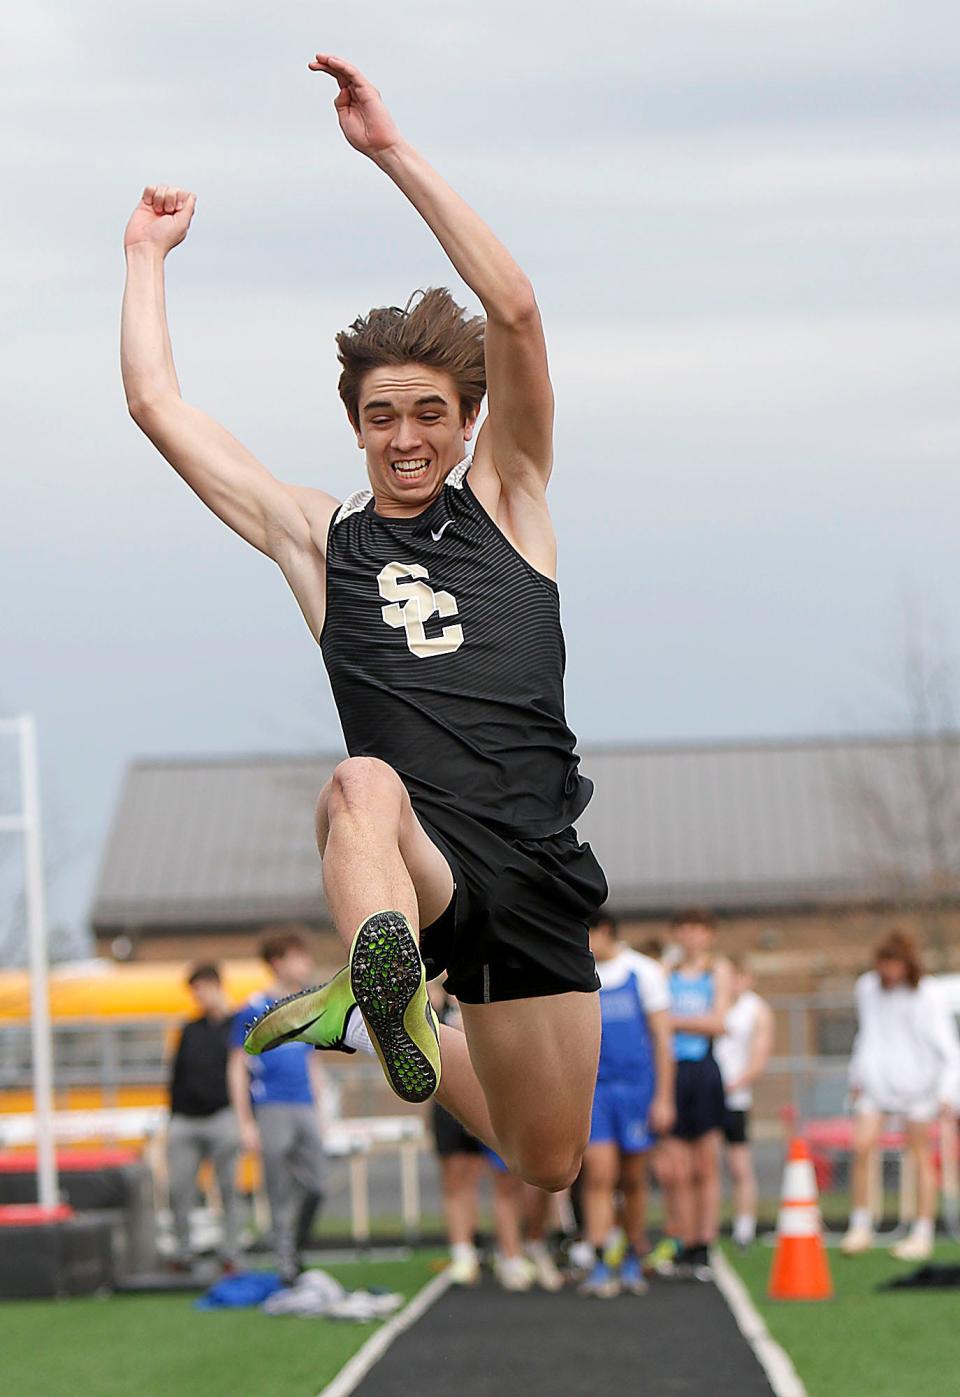 South Central's Isaac Blair competes in the long jump during the Forest Pruner Track Invitational at Crestview High School on Friday, April 22, 2022. TOM E. PUSKAR/TIMES-GAZETTE.COM